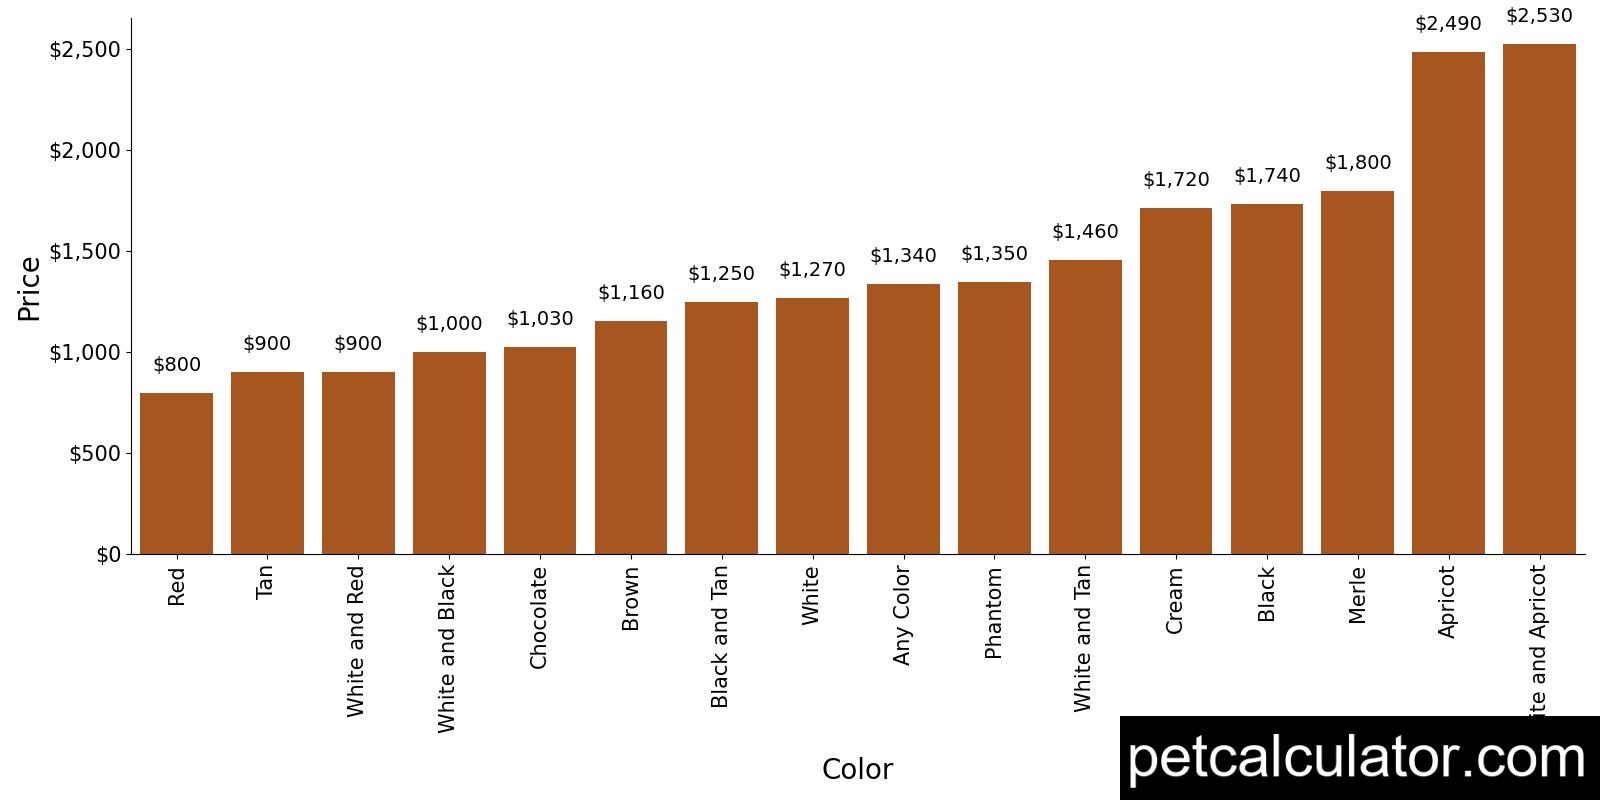 Price of Peek A Poo by Color 